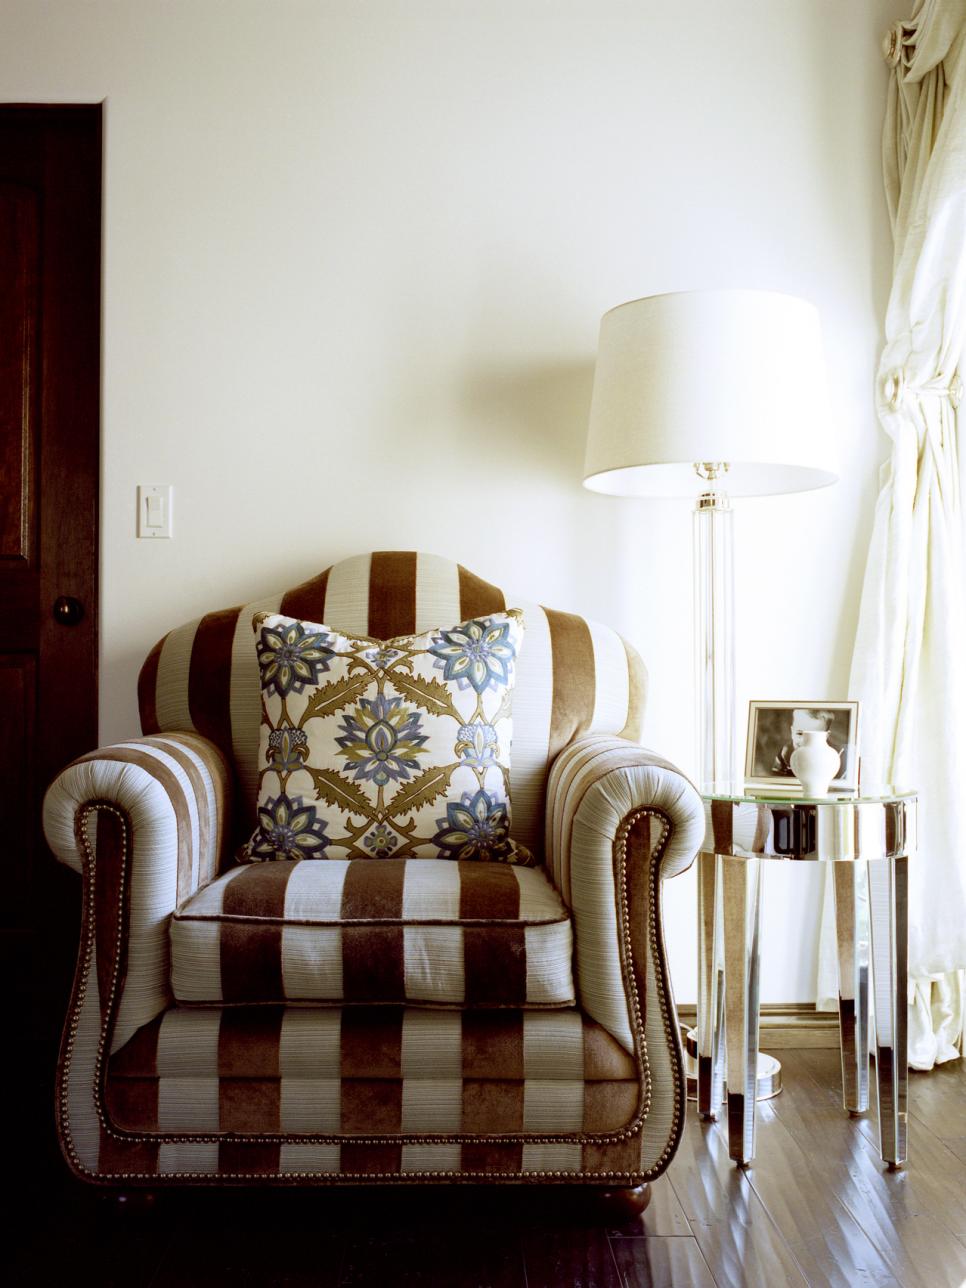 Transitional Sitting Room With Brown Striped Chair